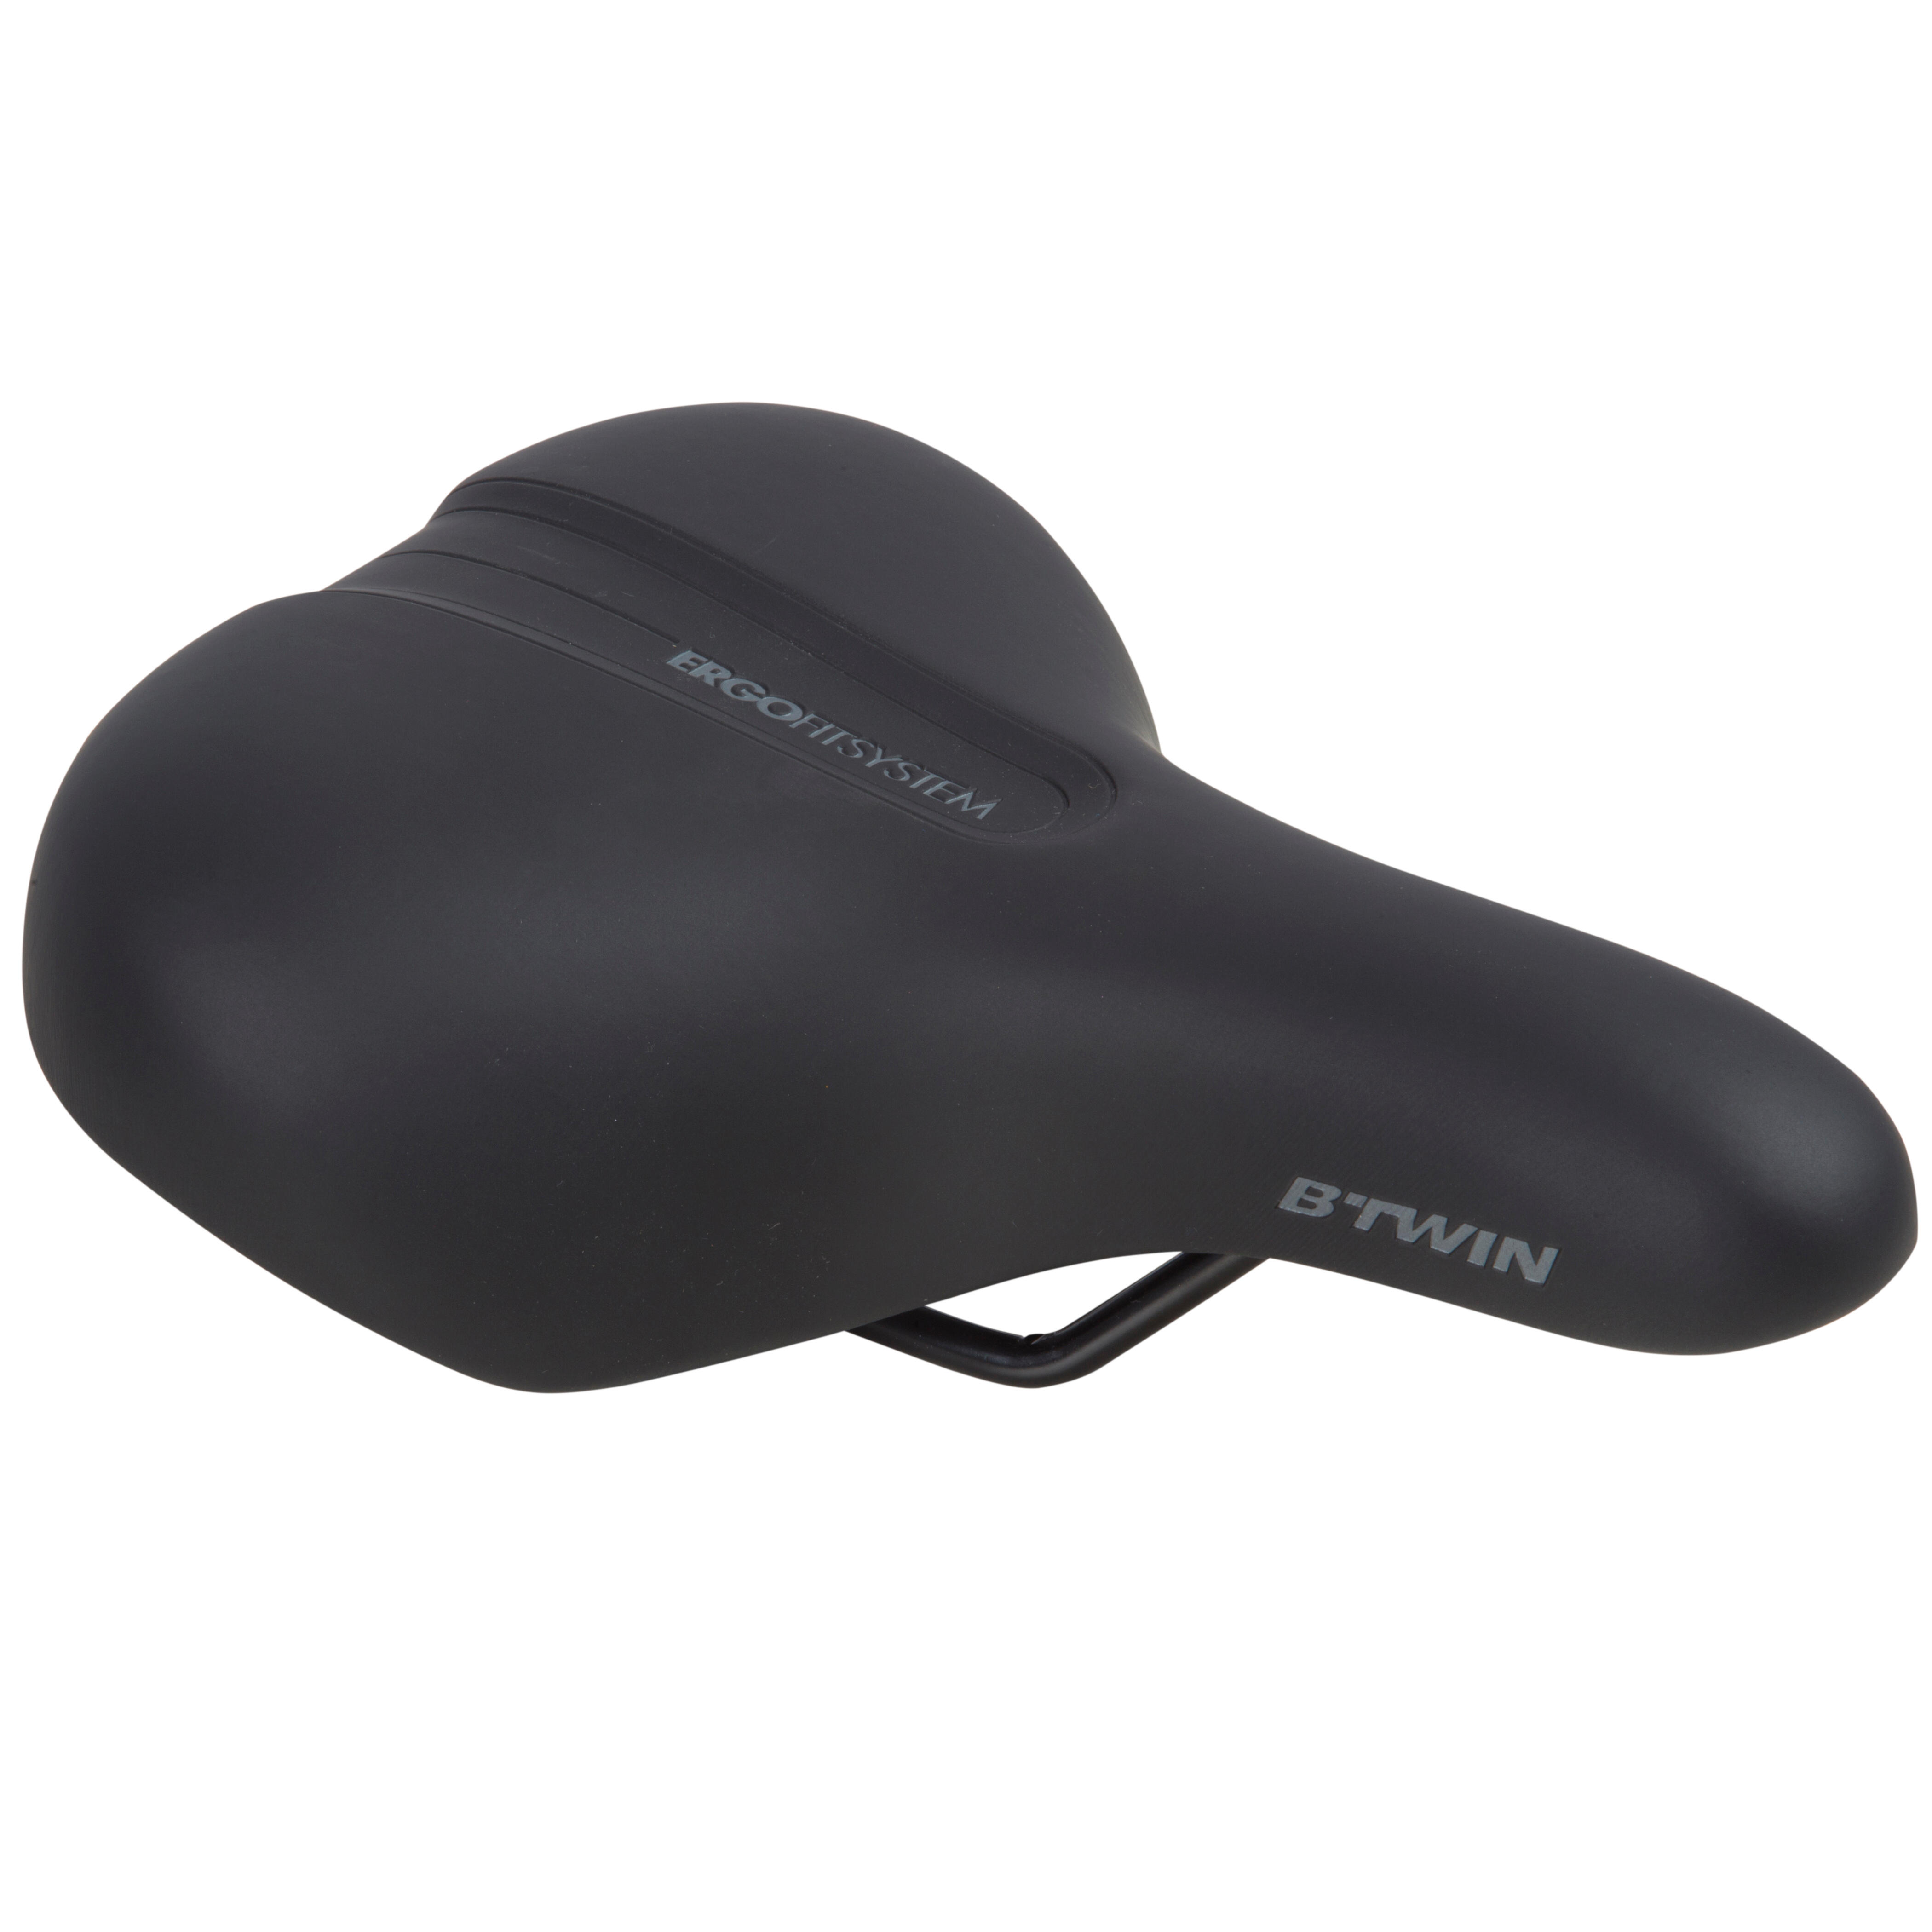 kids bicycle seat cover